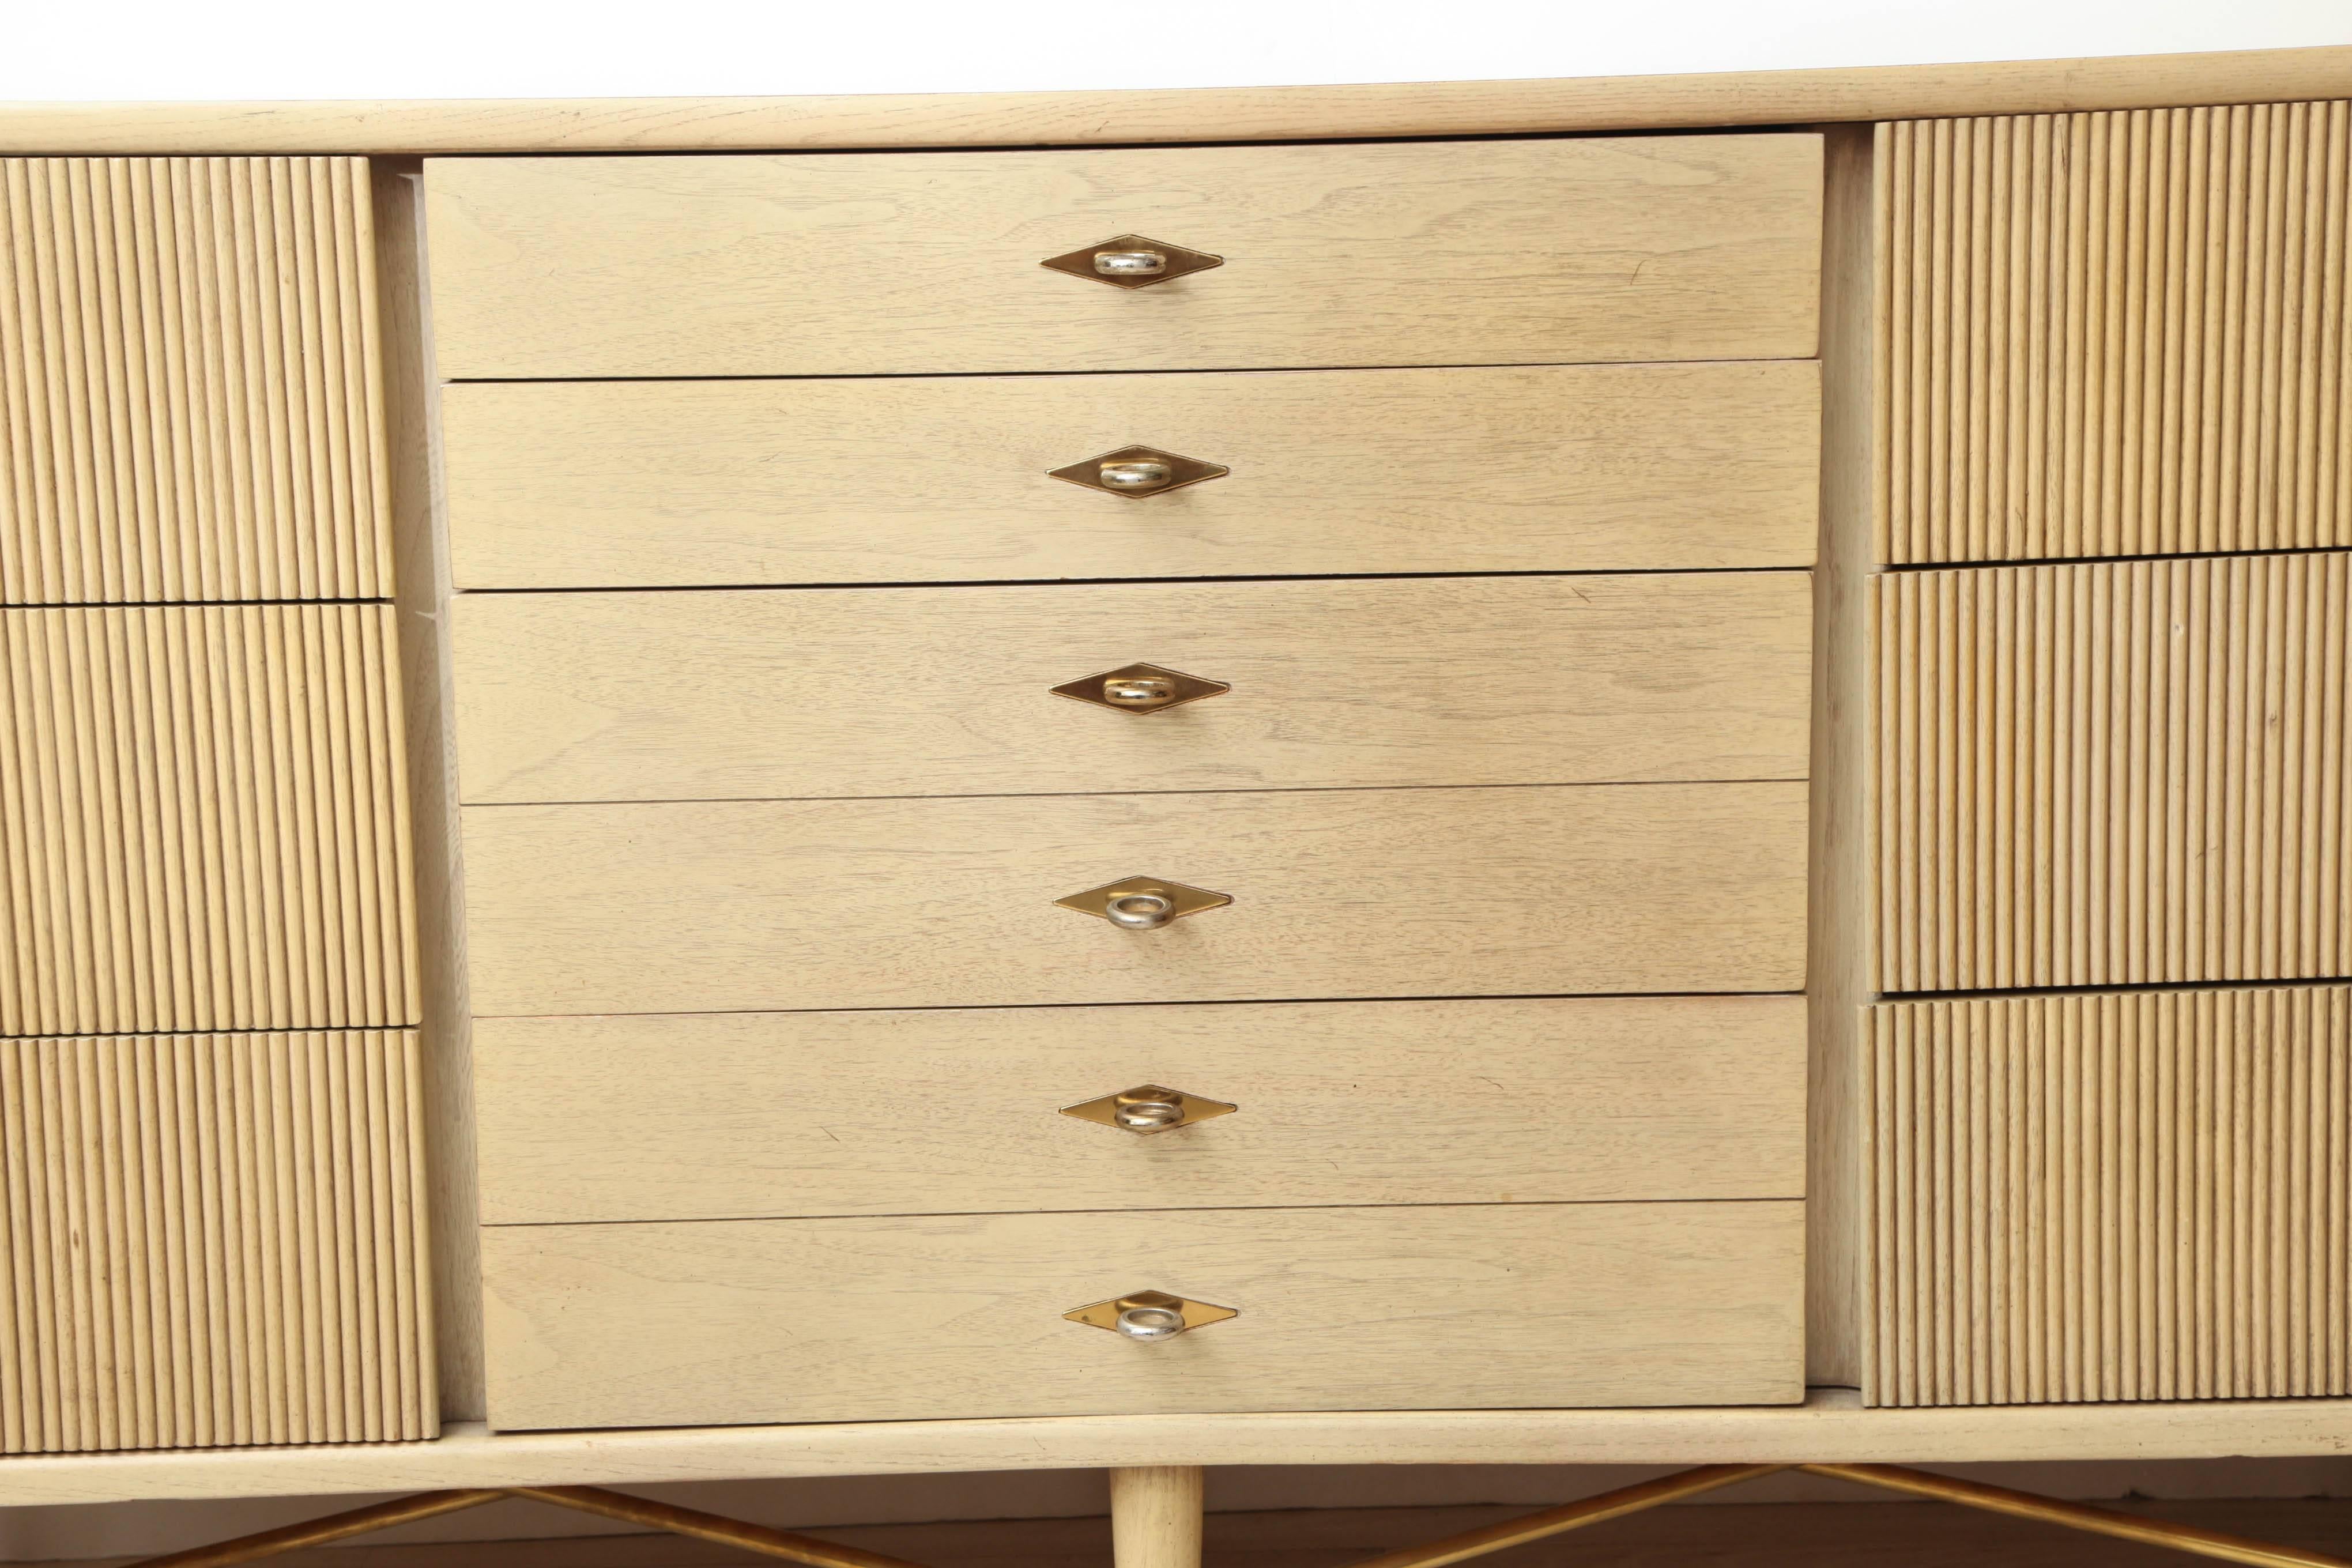 Blond oak commode/buffet with three sections, the center section with six narrow drawers flanked by two sections with three wide ribbed drawers.